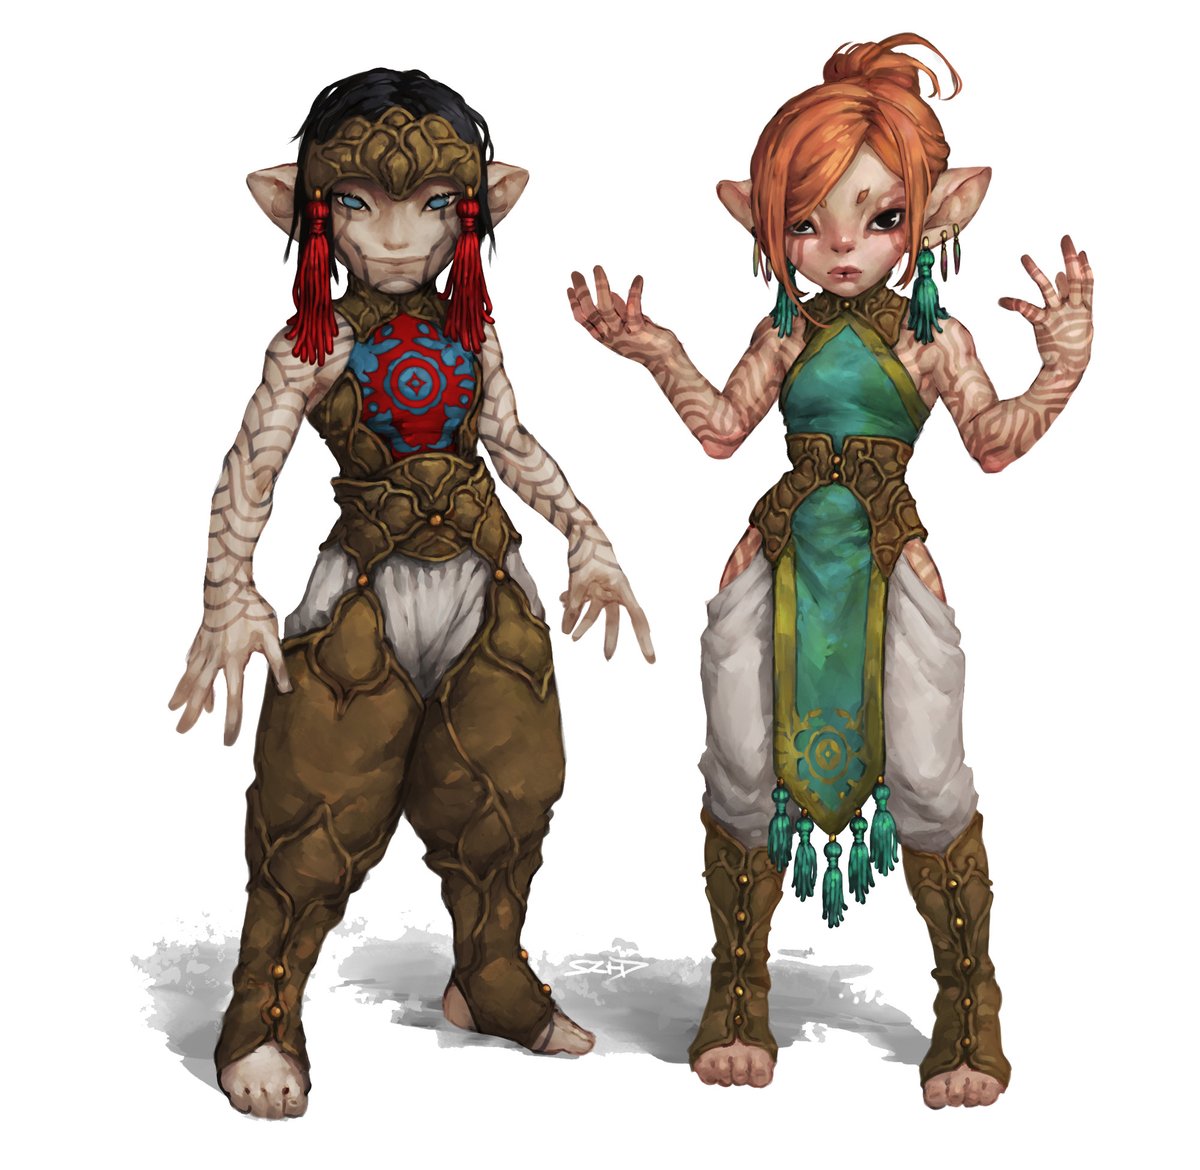 Who are these two? #playcnc #ttrpg #ttrpgcommunity #gnomes